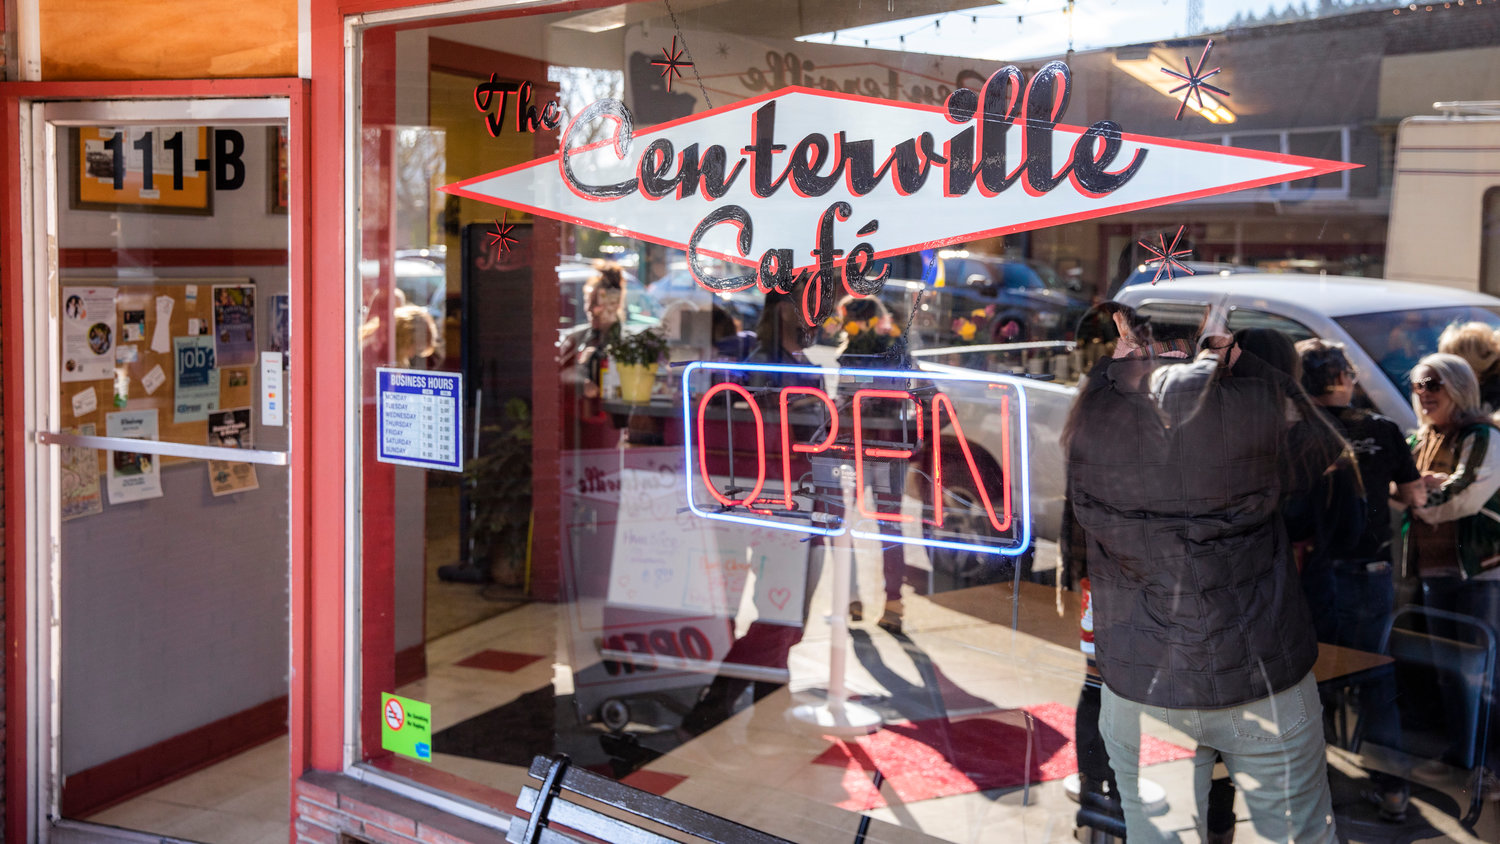 The Centerville Cafe is located at 111 North Tower Avenue in Centralia.